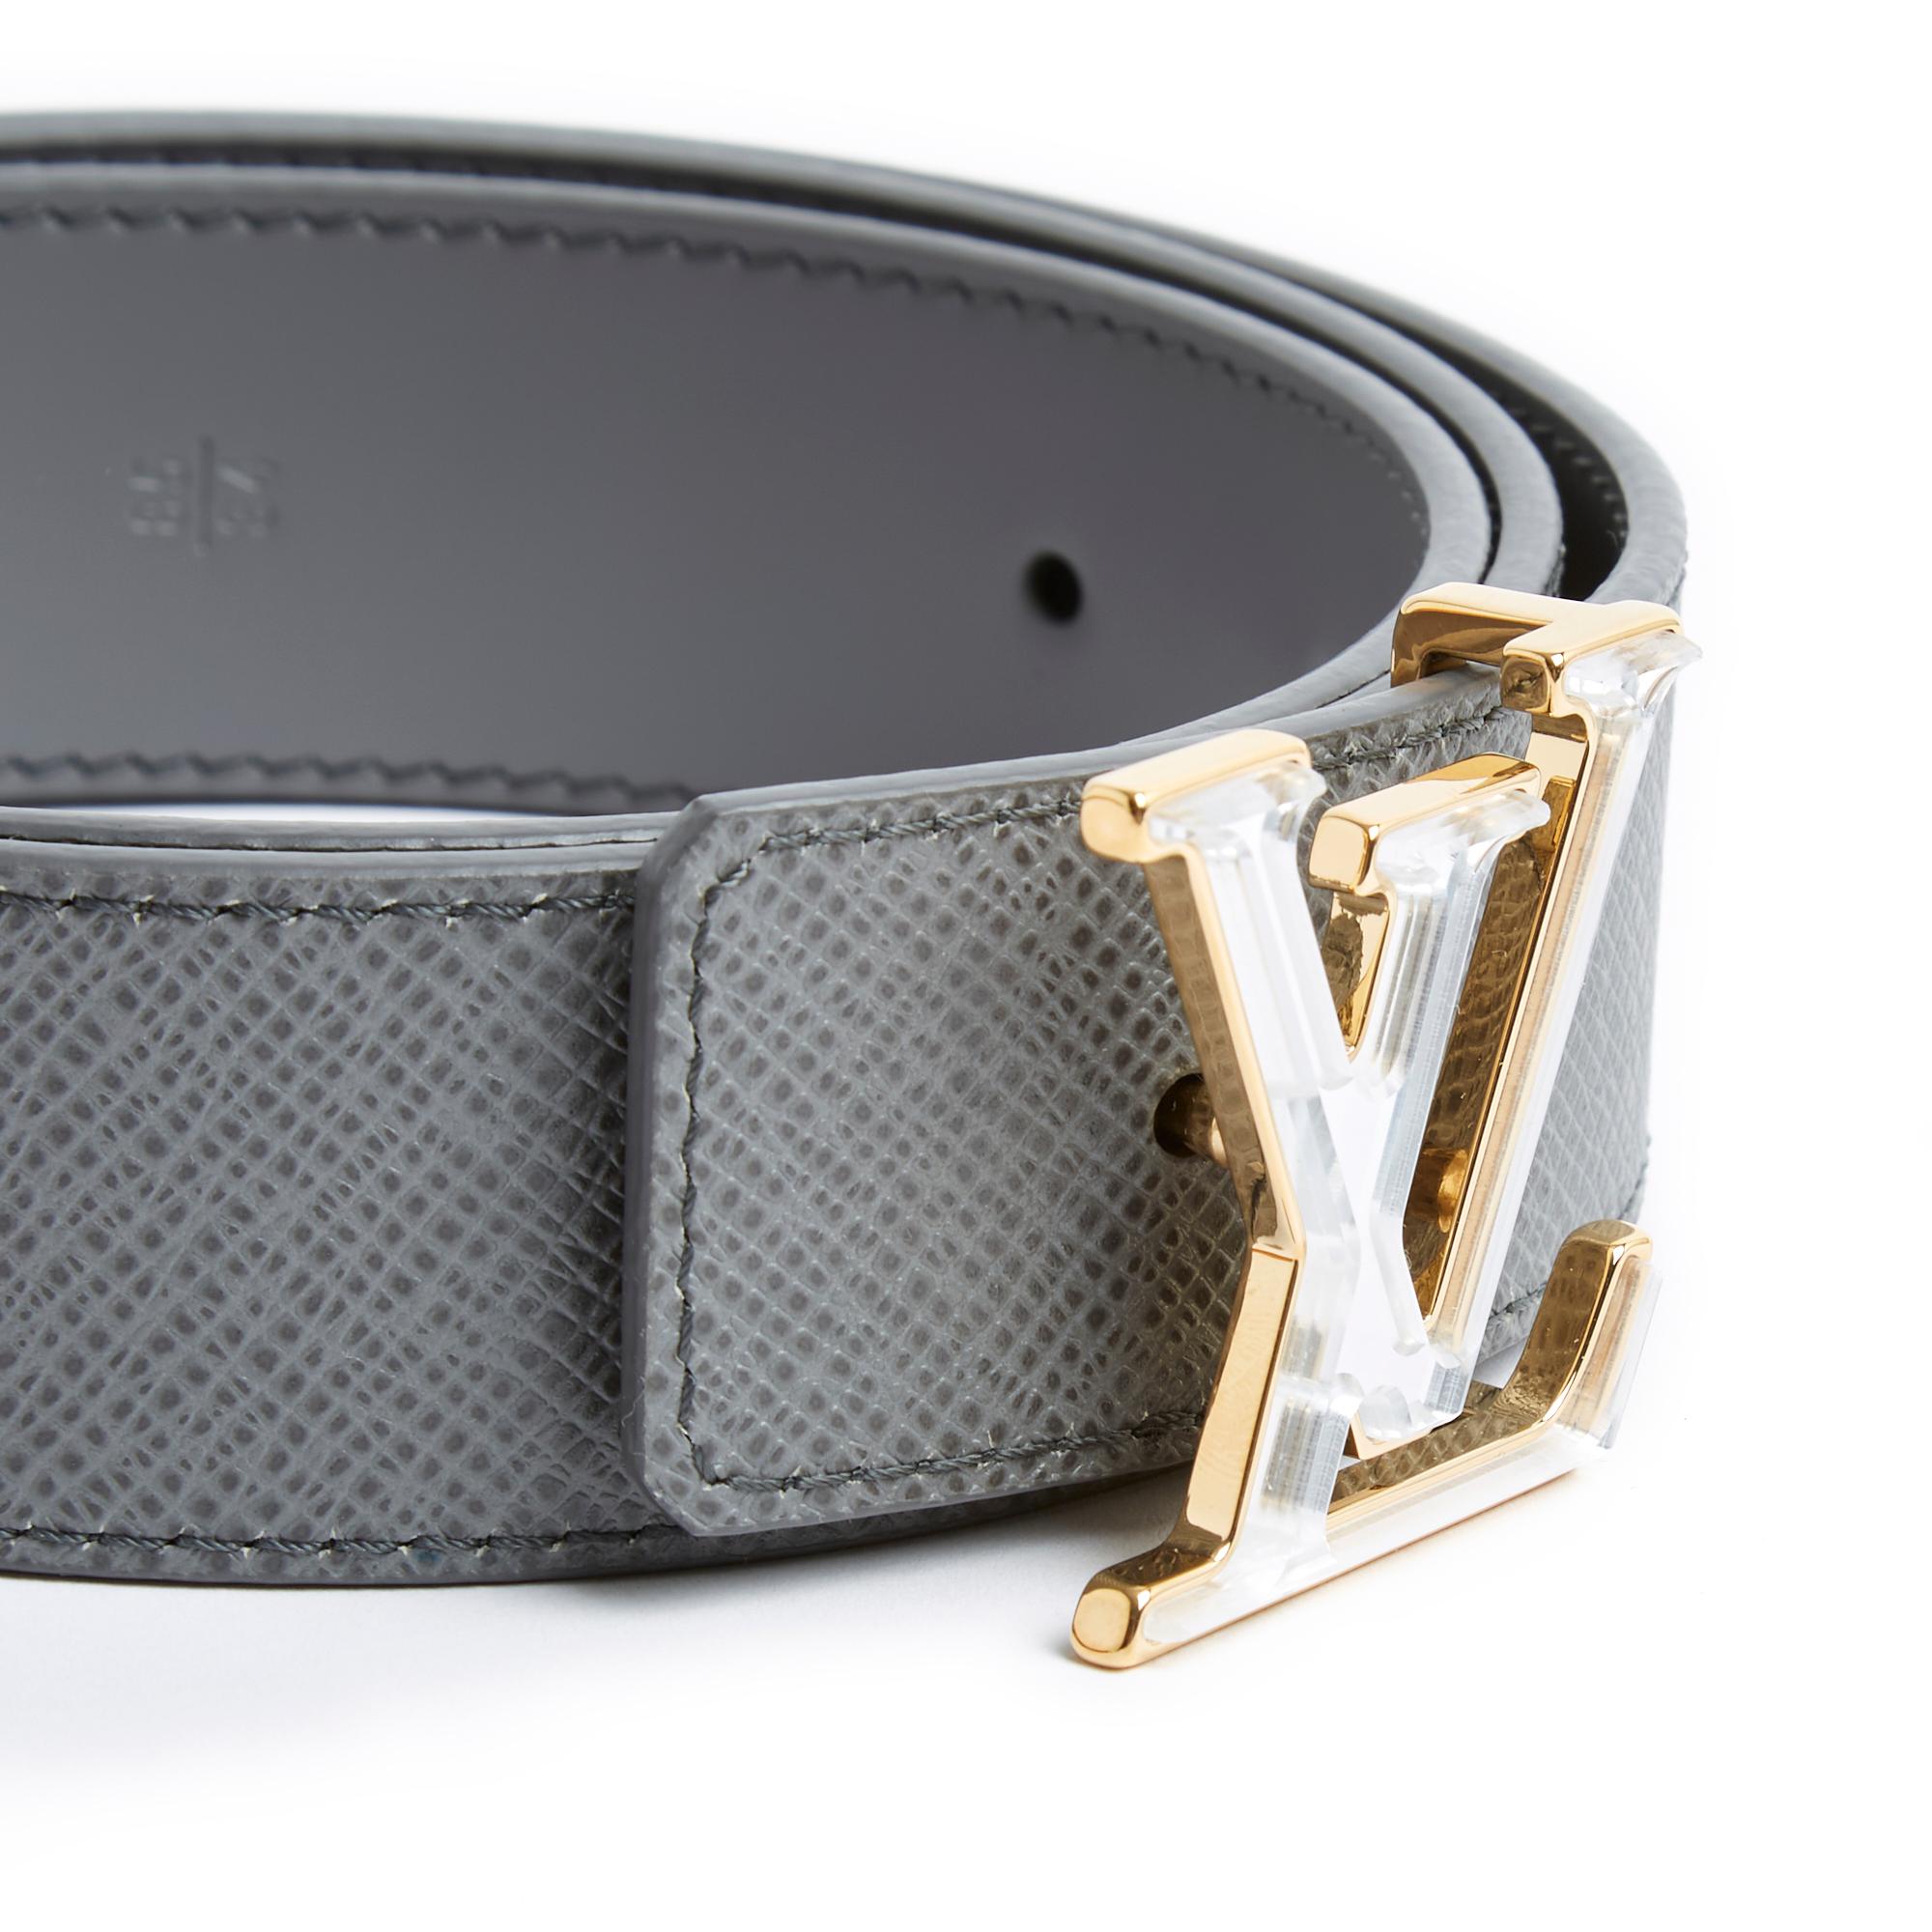 Louis Vuitton belt composed of a reversible link in 